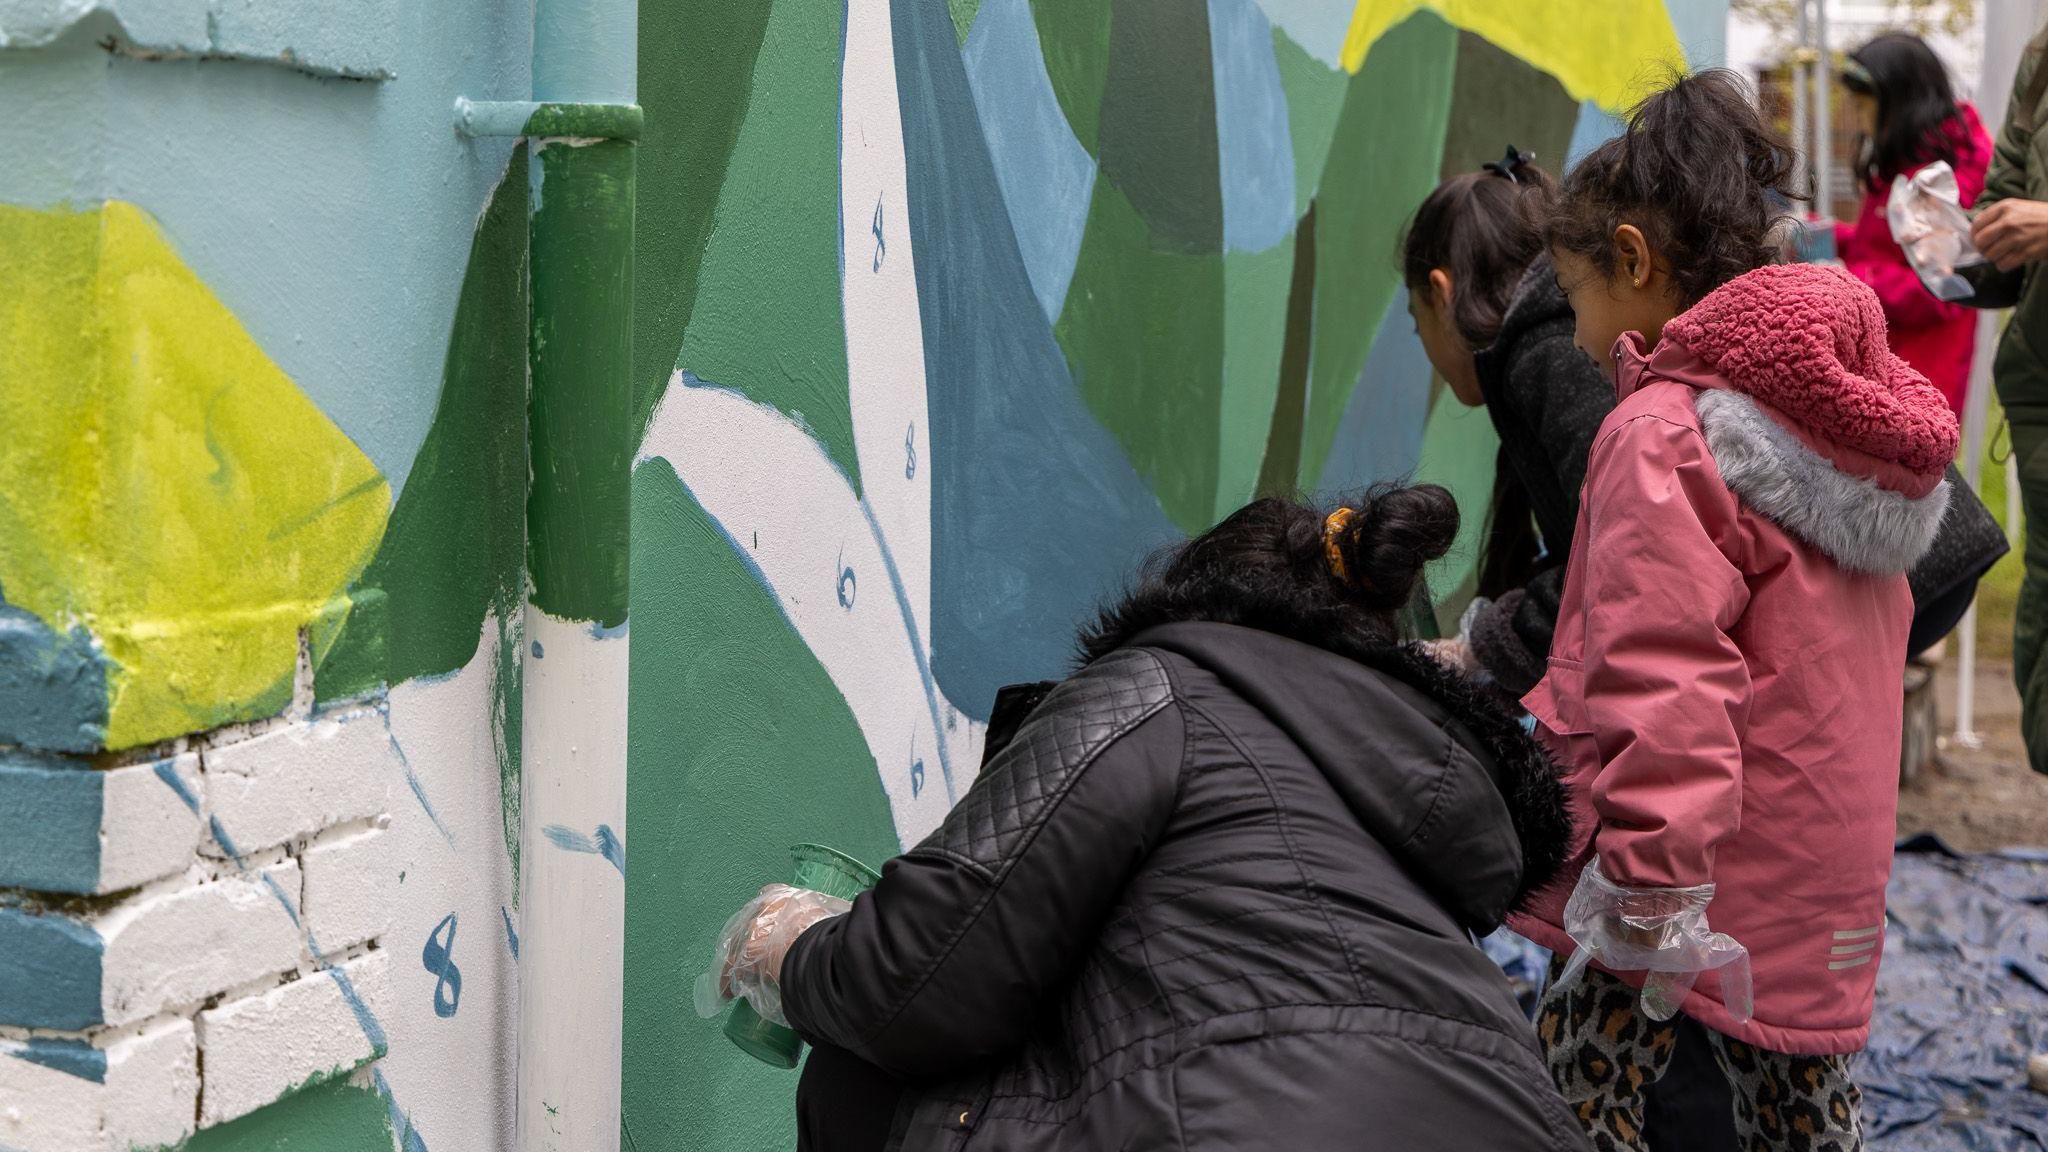 A family helping to paint the mural